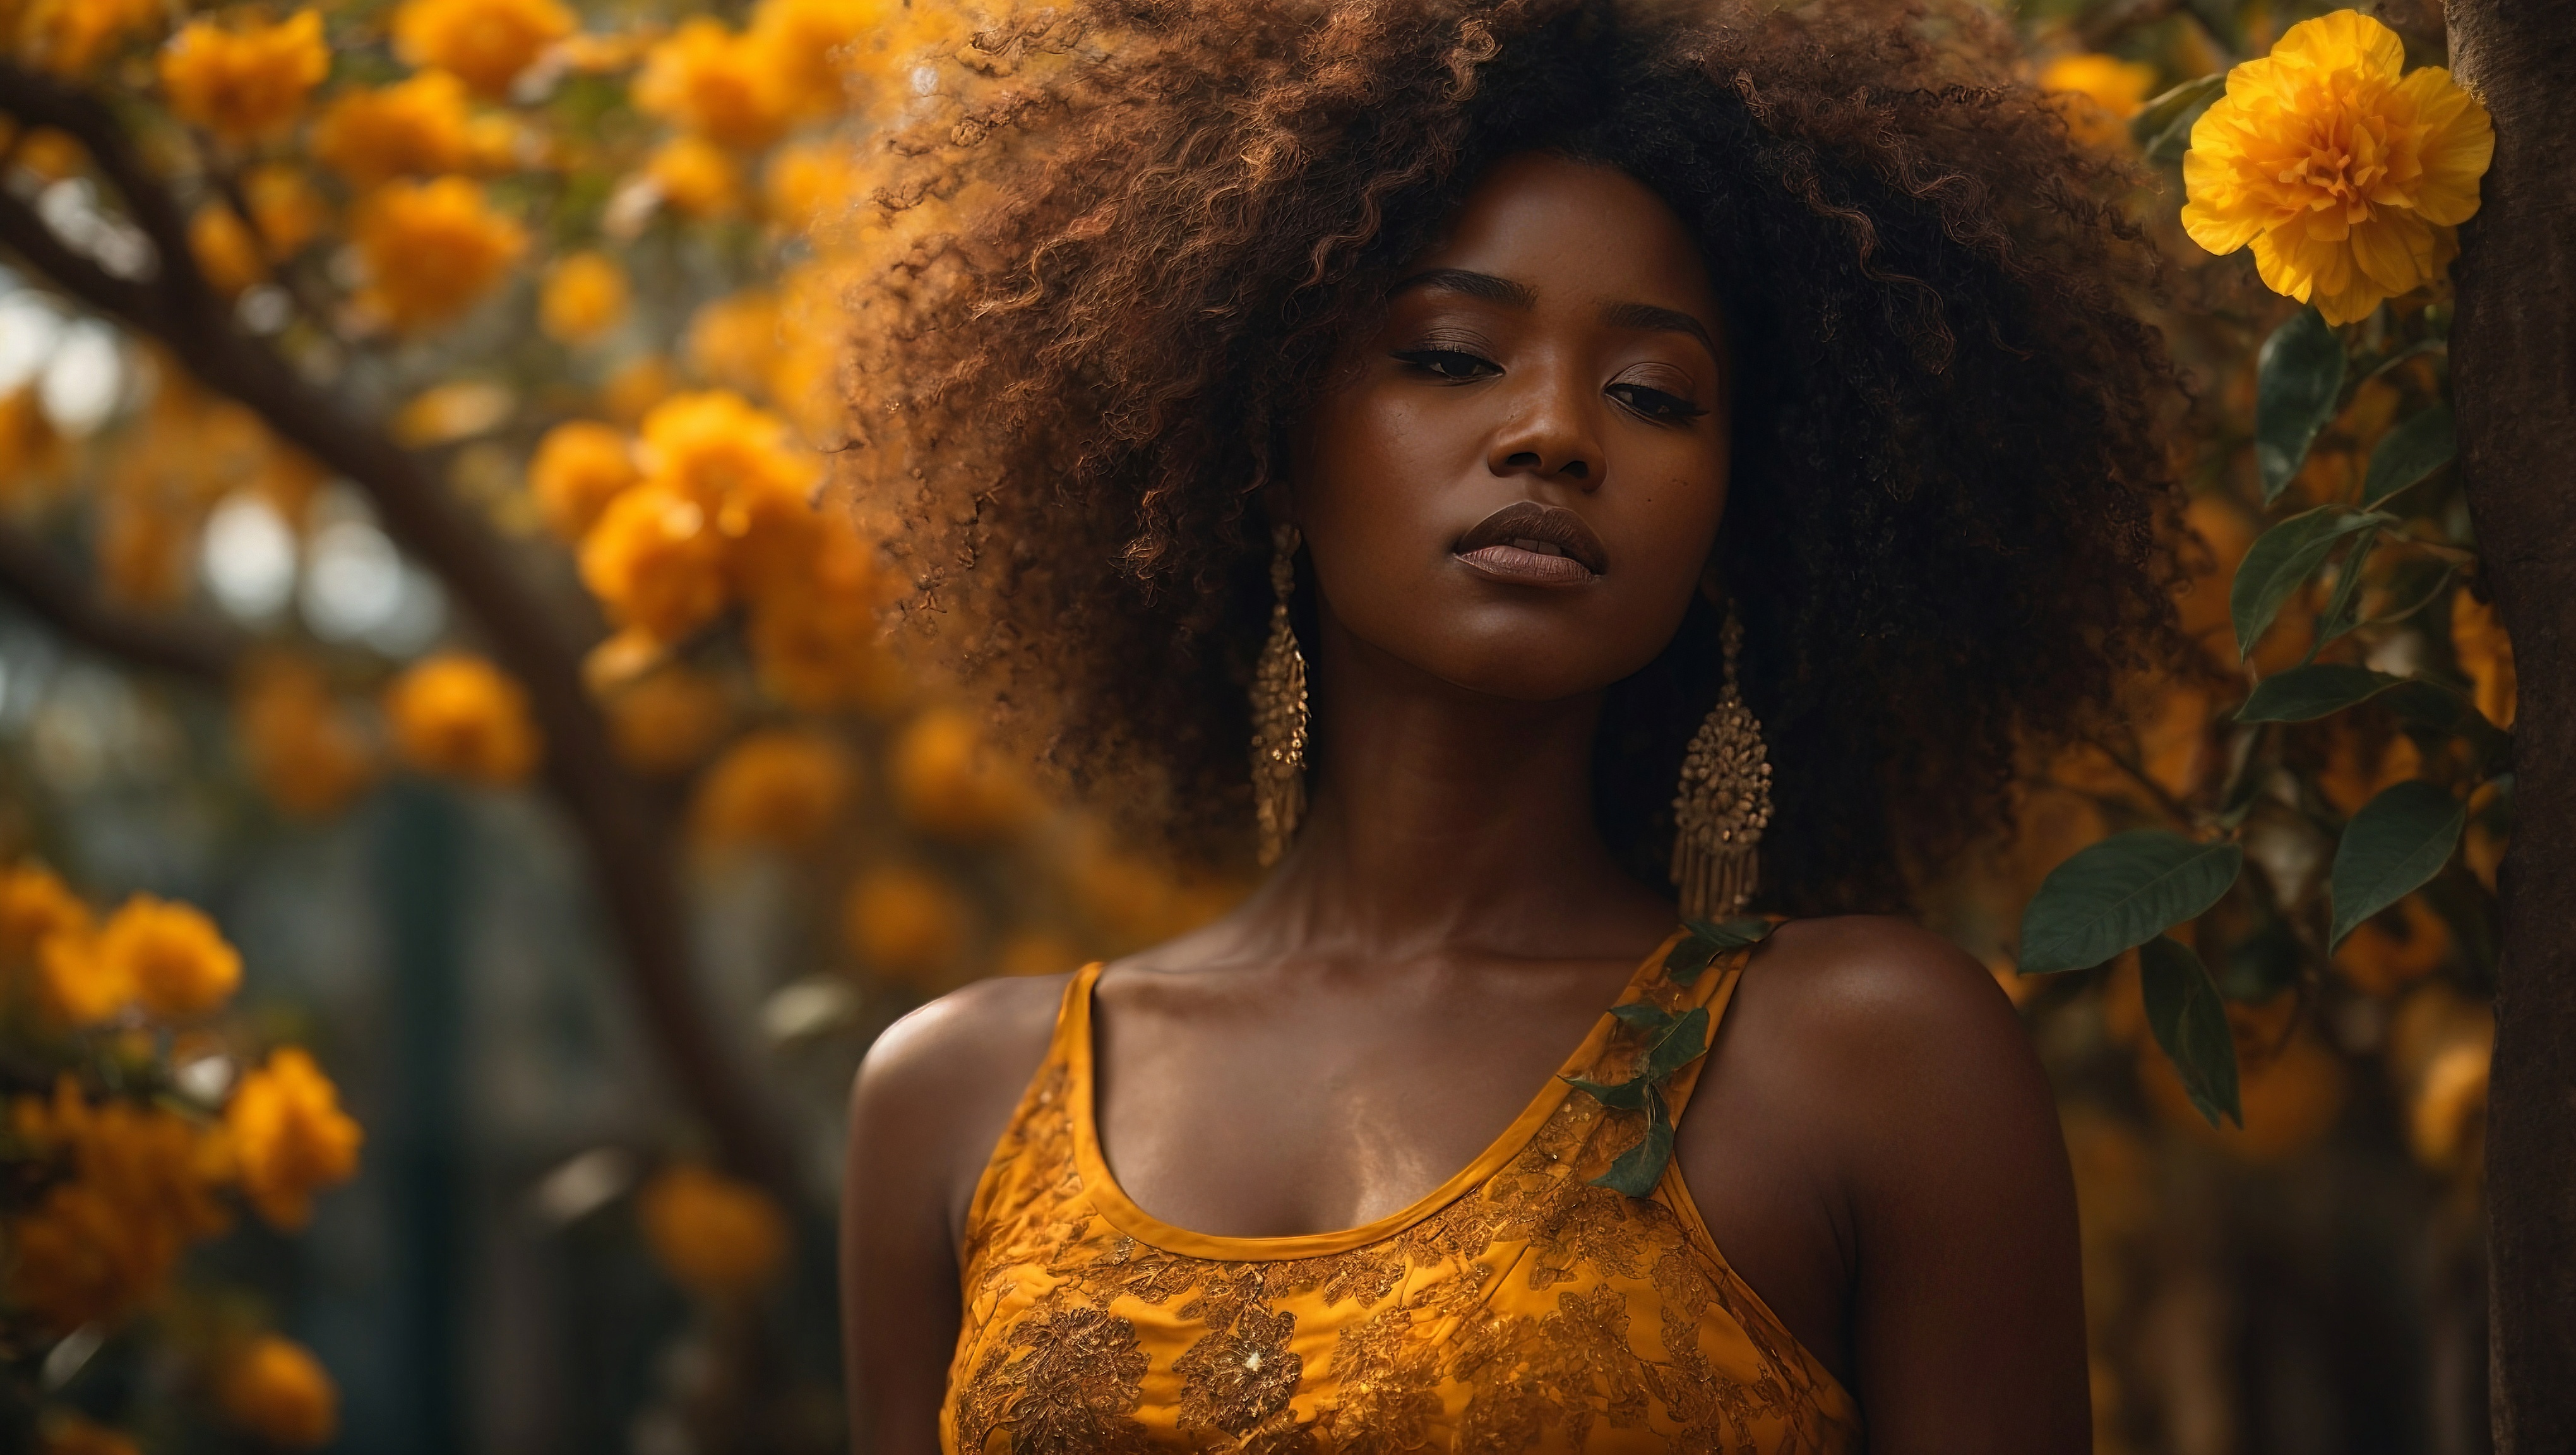 A beautiful young black woman wearing yellow clothes standing in front of flowers